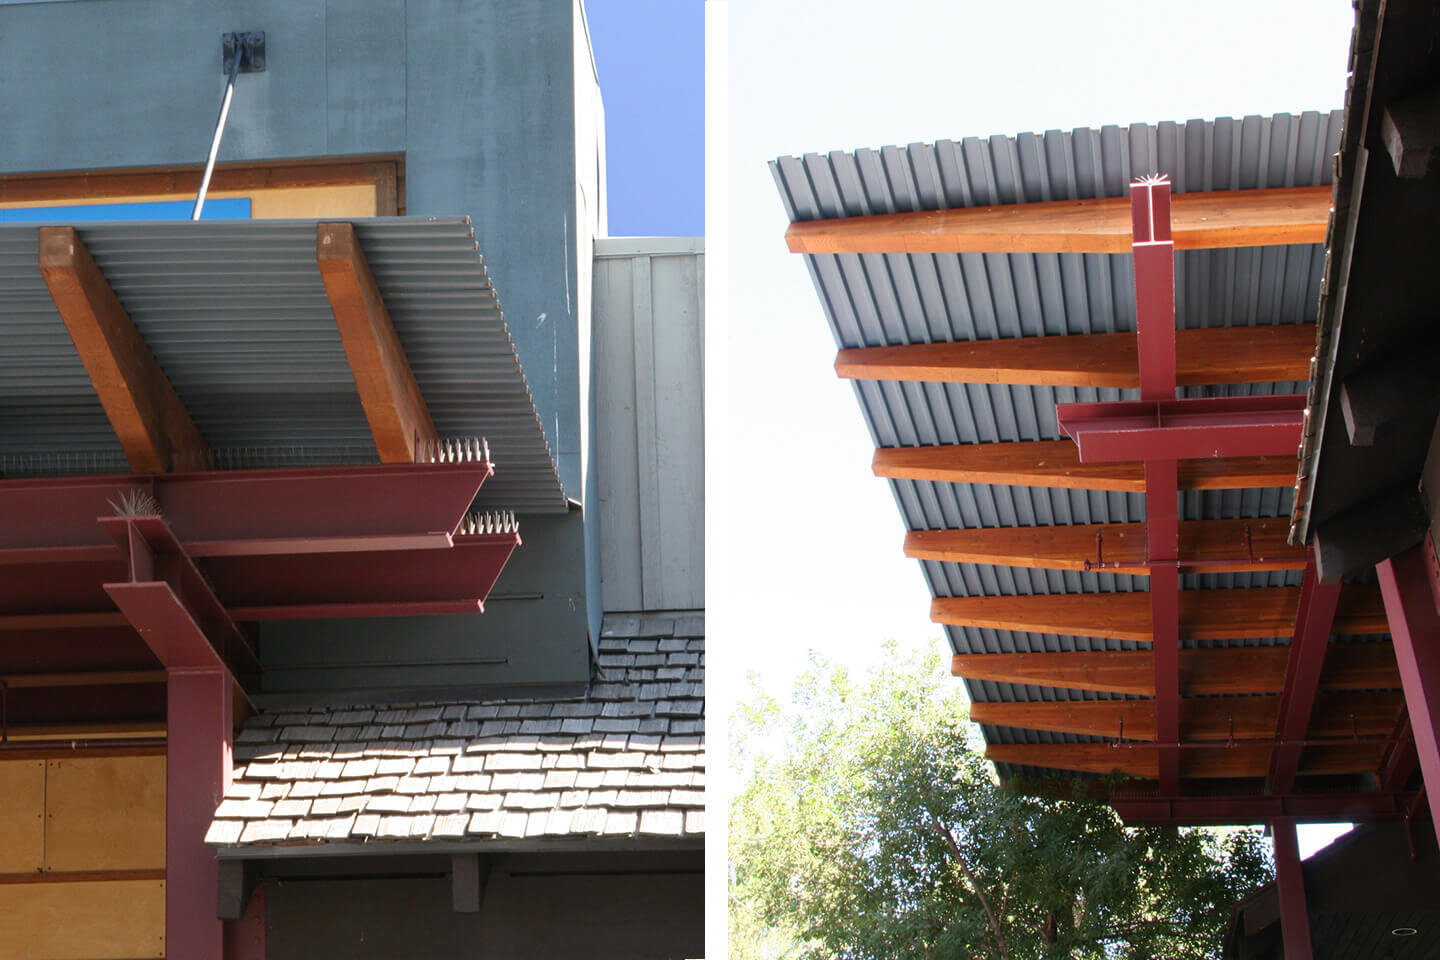 Awning details with corrugated metal and brackets